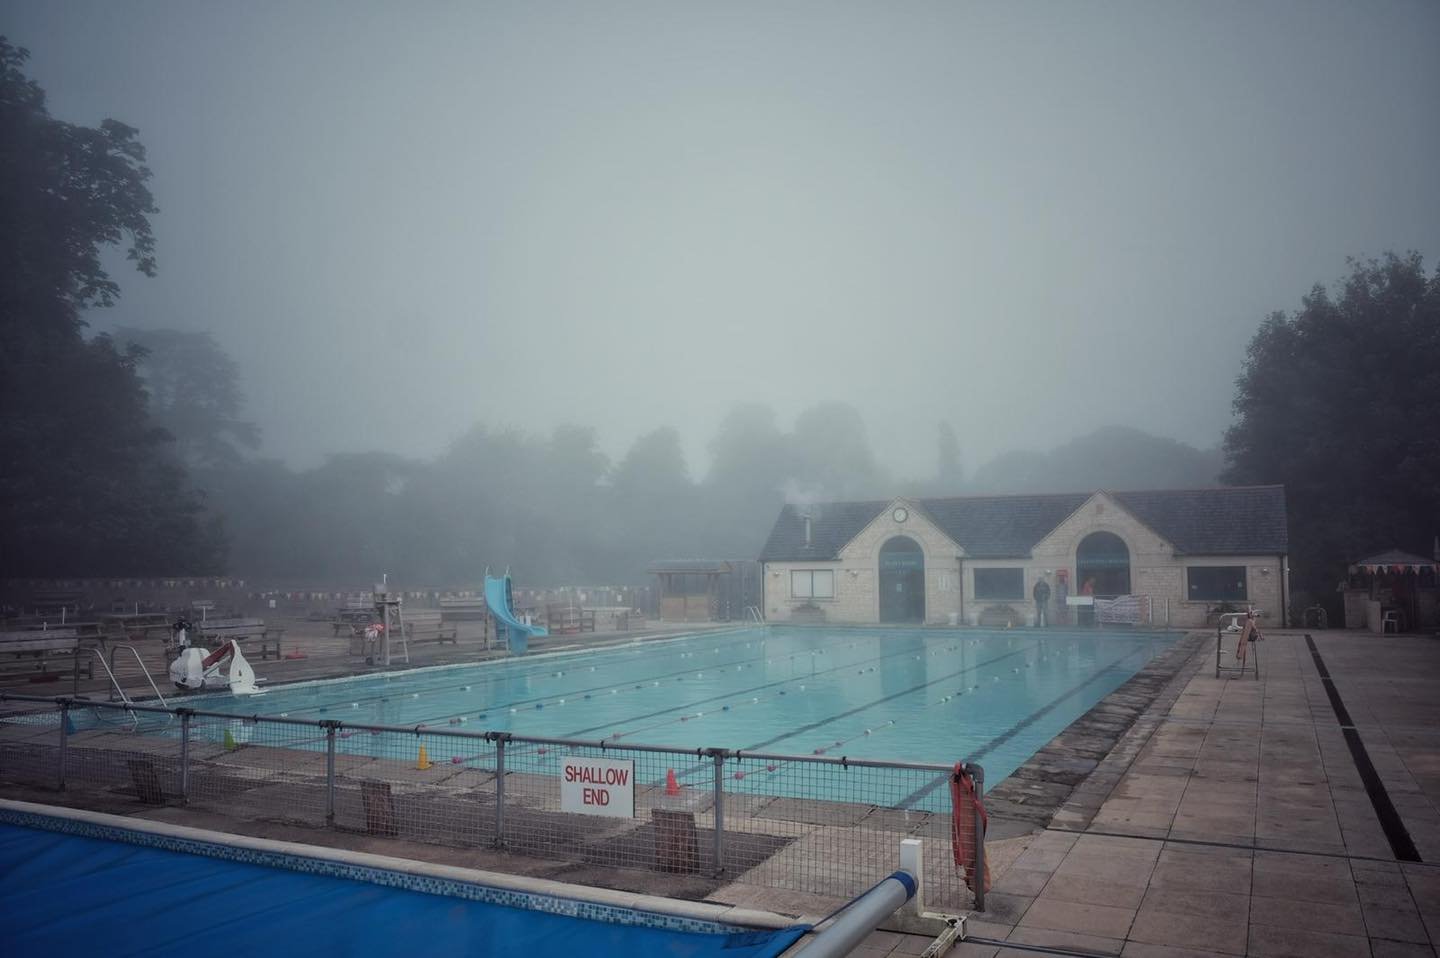 Early Morning - Cirencester Open Air Swimming Pool